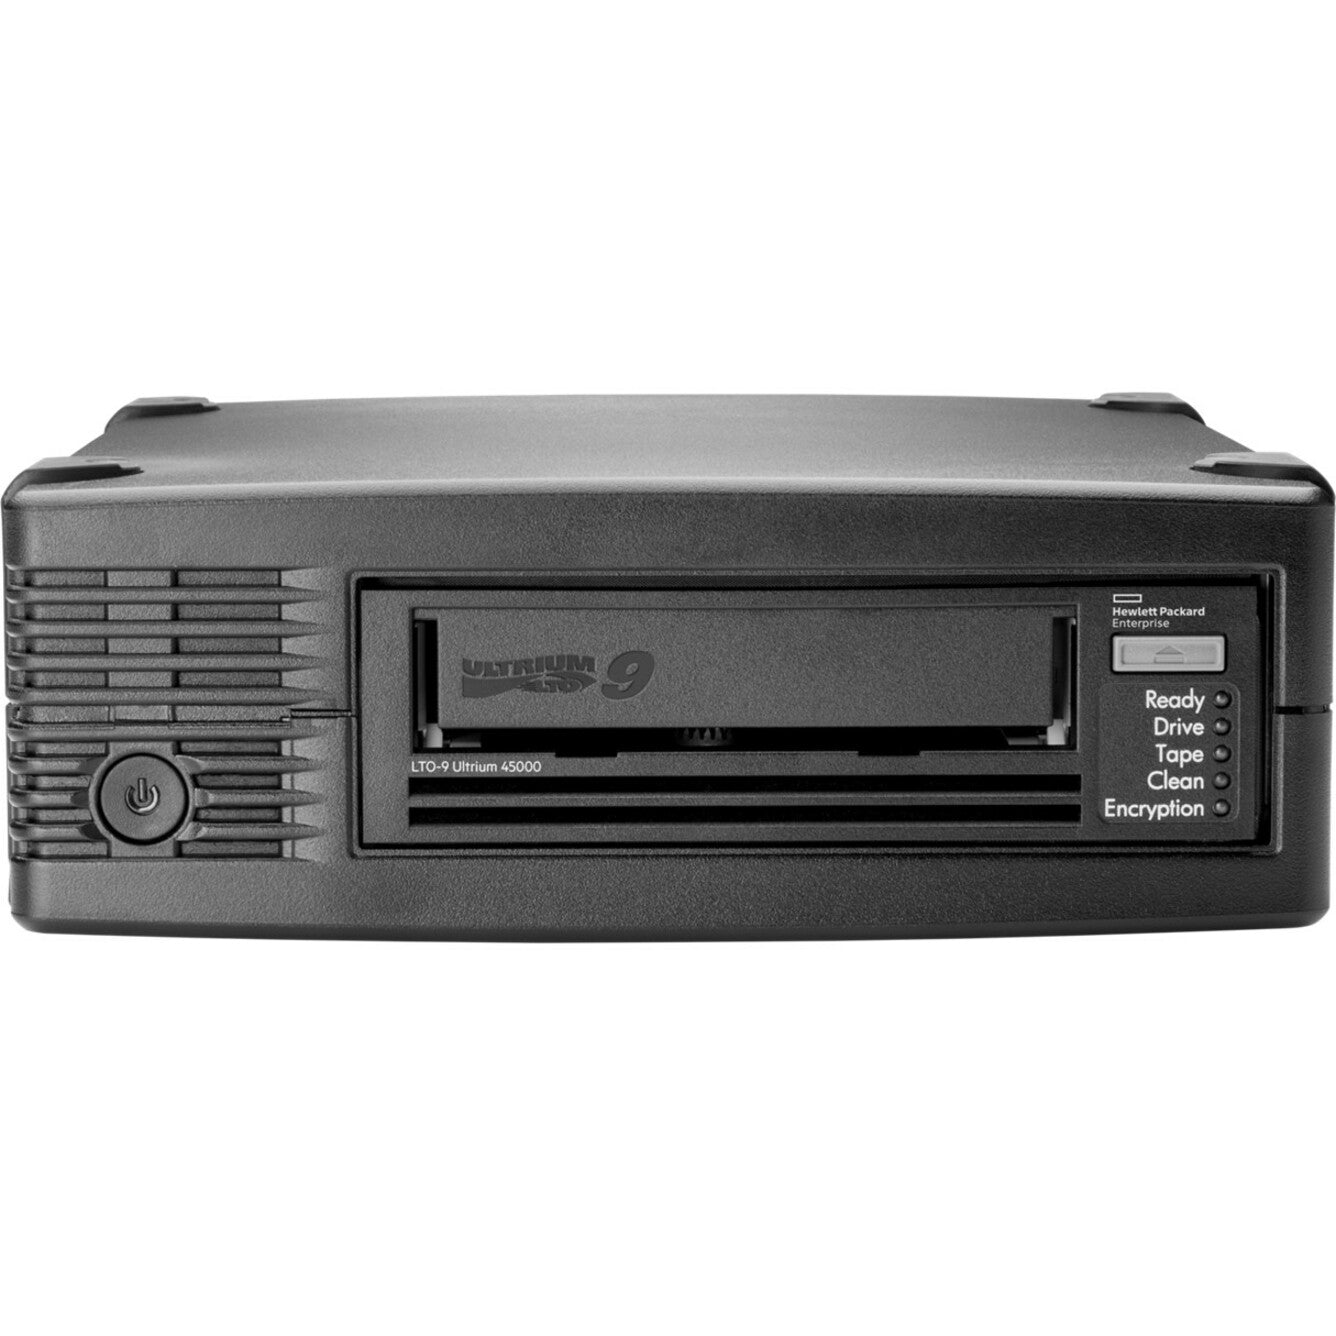 HPE StoreEver LTO-9 Ultrium 45000 External Tape Drive, 18TB Native Capacity, 45TB Compressed Capacity